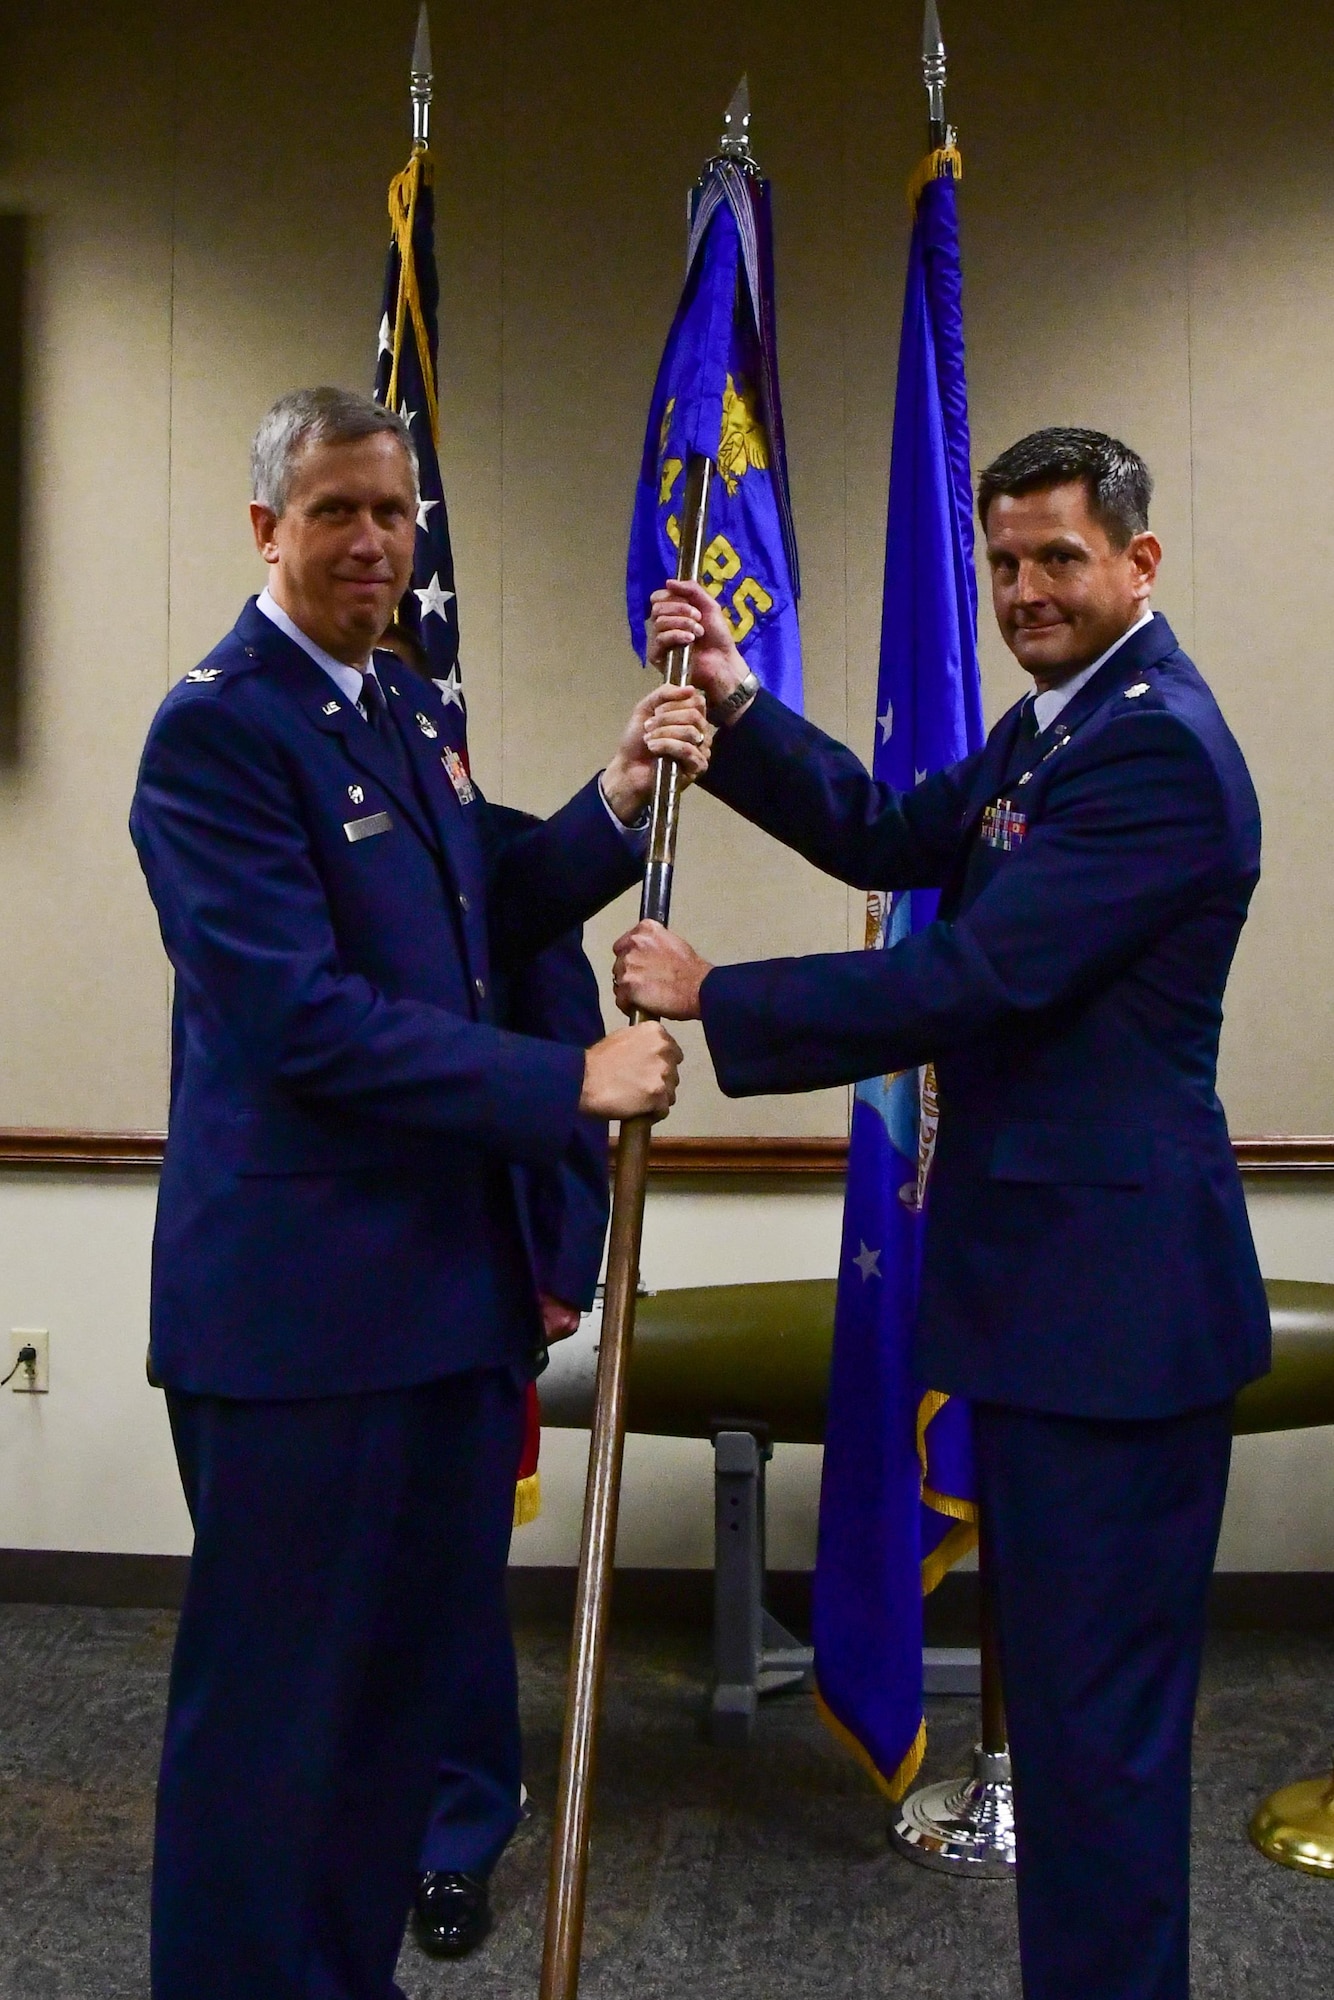 U.S. Air Force Col. Robert N. Burgess, 307th Operations Group commander, presents the guidon of the 343rd Bomb Squadron to Lt. Col. John P. Booker during a change of command ceremony at Barksdale Air Force Base, La., June 3, 2017. Booker is assuming command of the only Air Force Reserve nuclear certified bomb squadron. (U.S. Air Force photo by Master Sgt. Dachelle Melville/Released)